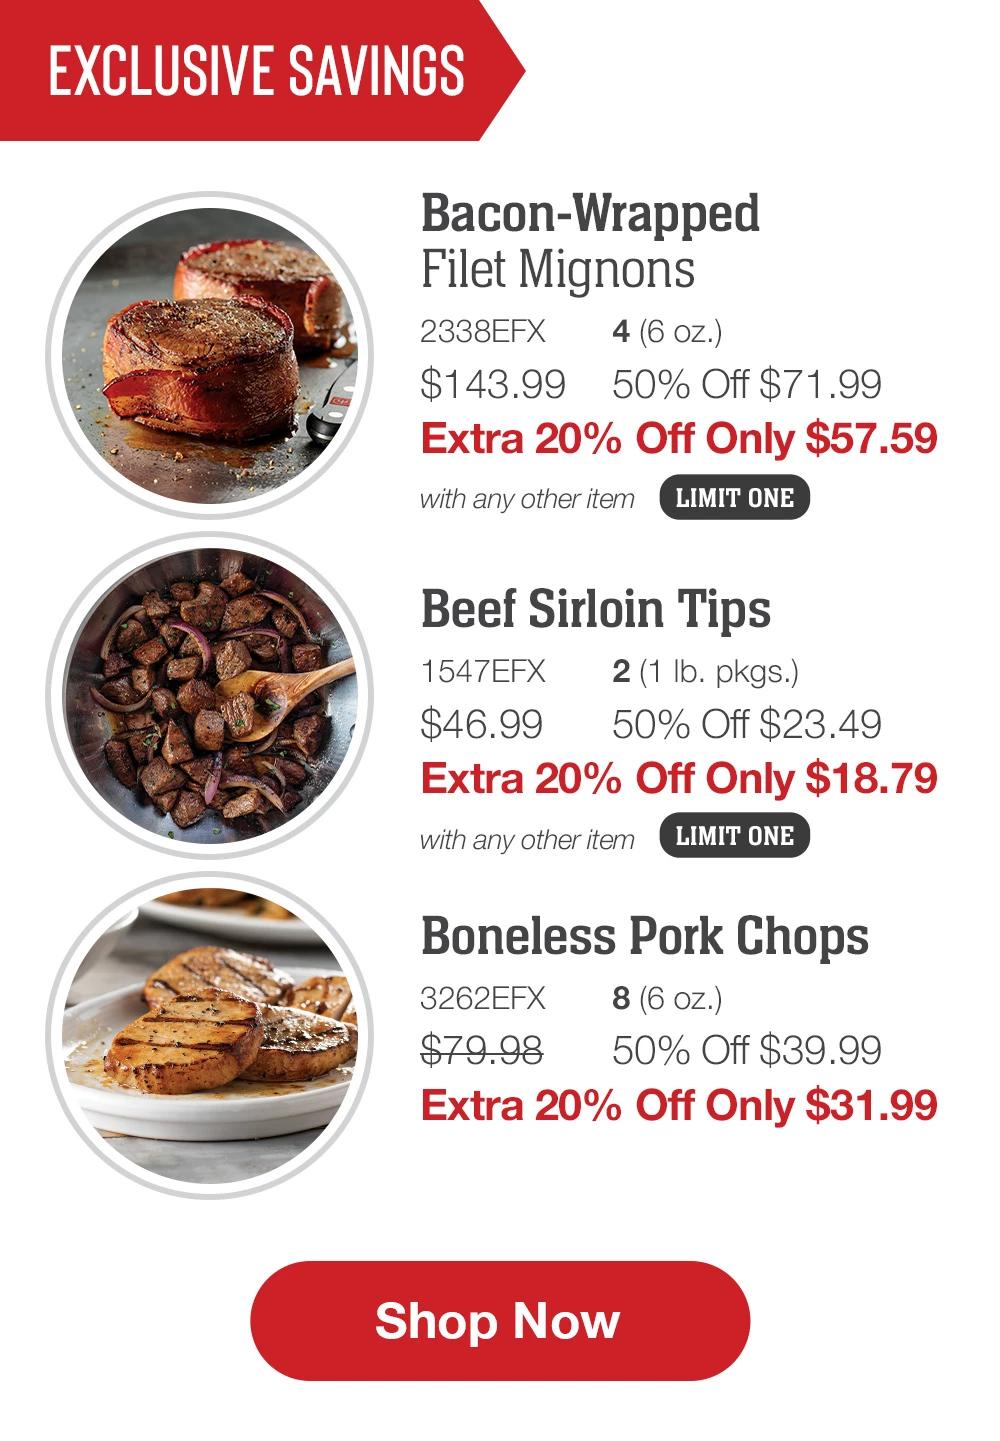 EXCLUSIVE SAVINGS | Bacon-Wrapped Filet Mignons - 2338EFX 4 (6 oz.) $143.99 50% Off $71.99 Extra 20% Off Only $57.59 with any other item LIMIT ONE | Beef Sirloin Tips - 1547EFX  2 (1 lb. pkgs.) $46.99  50% Off $23.49 Extra 20% Off Only $18.79 with any other item LIMIT ONE | Boneless Pork Chops - 3262EFX 8 (6 oz.) $79.98  50% Off $39.99 Extra 20% Off Only $31.99 || SHOP NOW